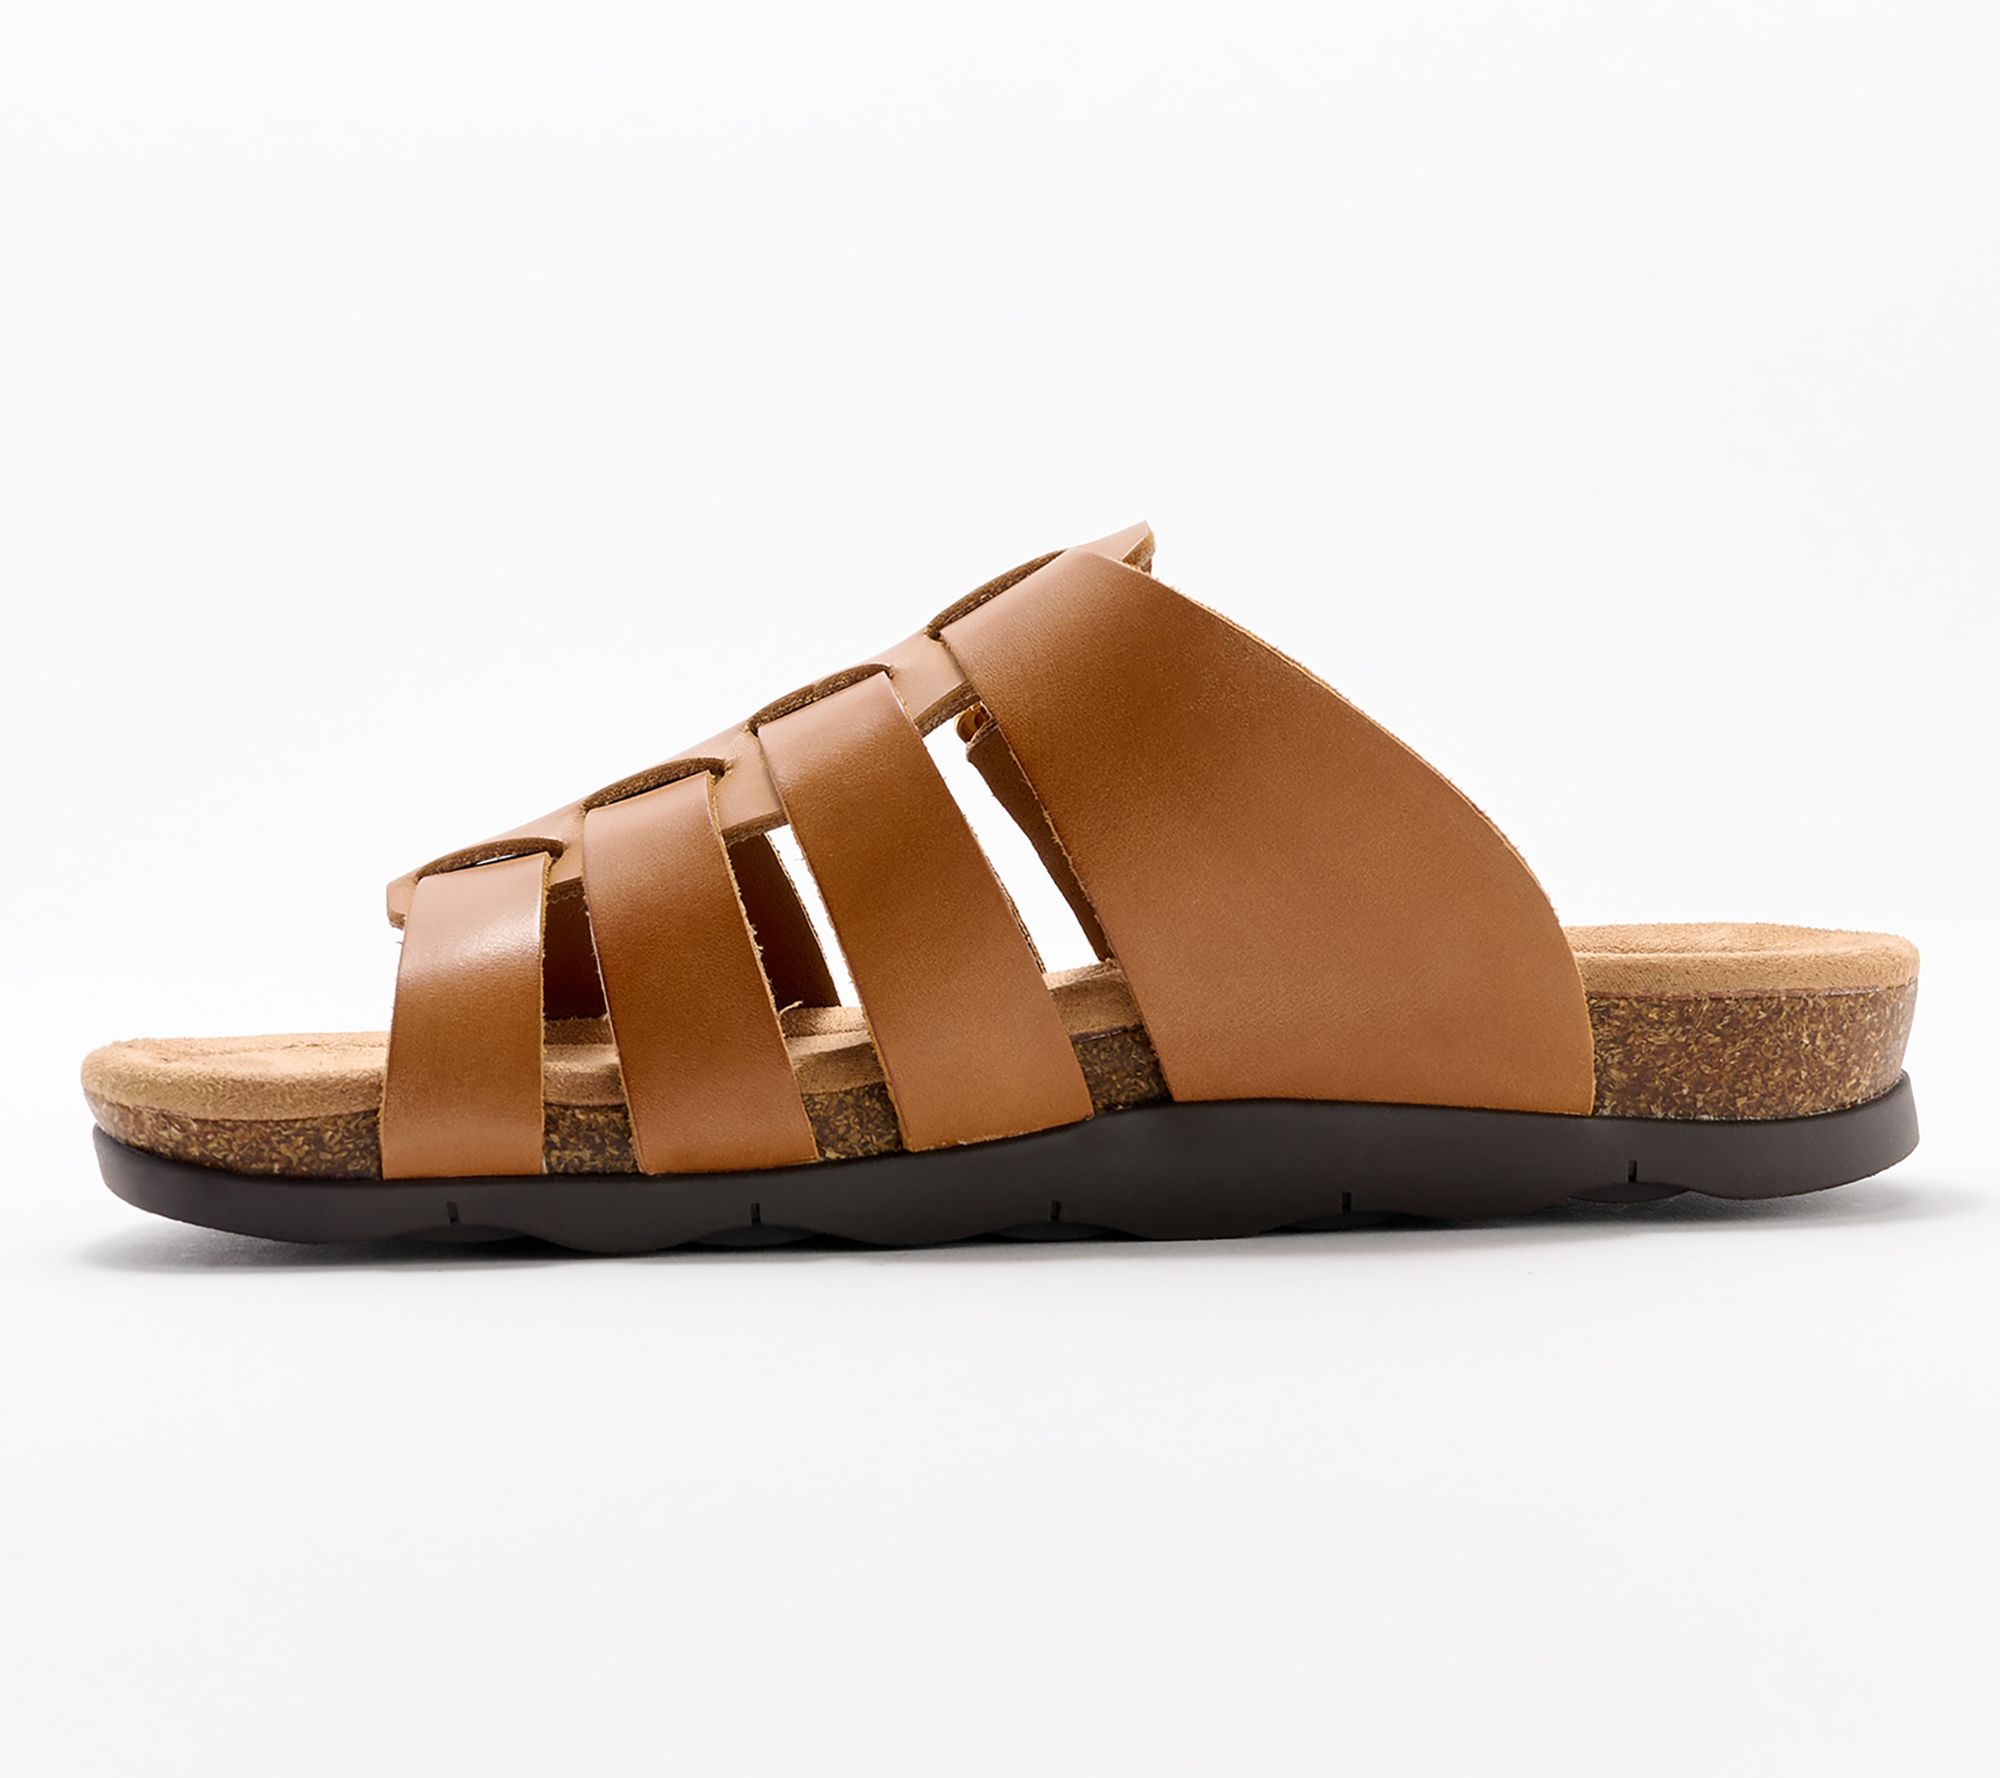 Men's criss-cross slide sandals with arch support. Colour: brown